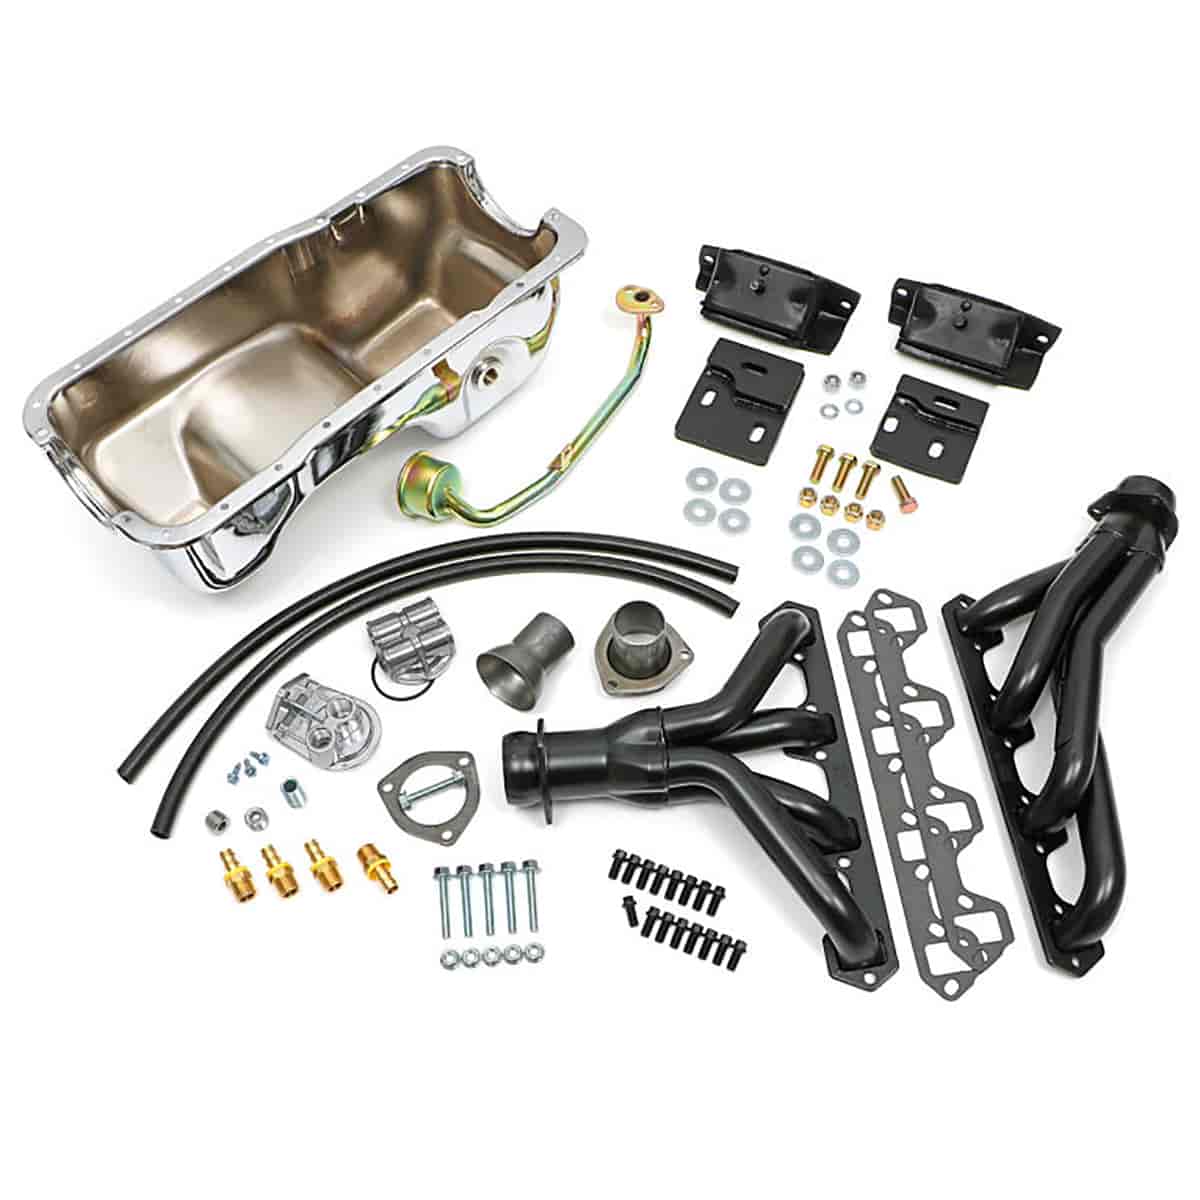 Engine Swap-in-a-Box Kit 1983-1997 Ford Ranger 2WD - Black Maxx Ceramic Coated Headers